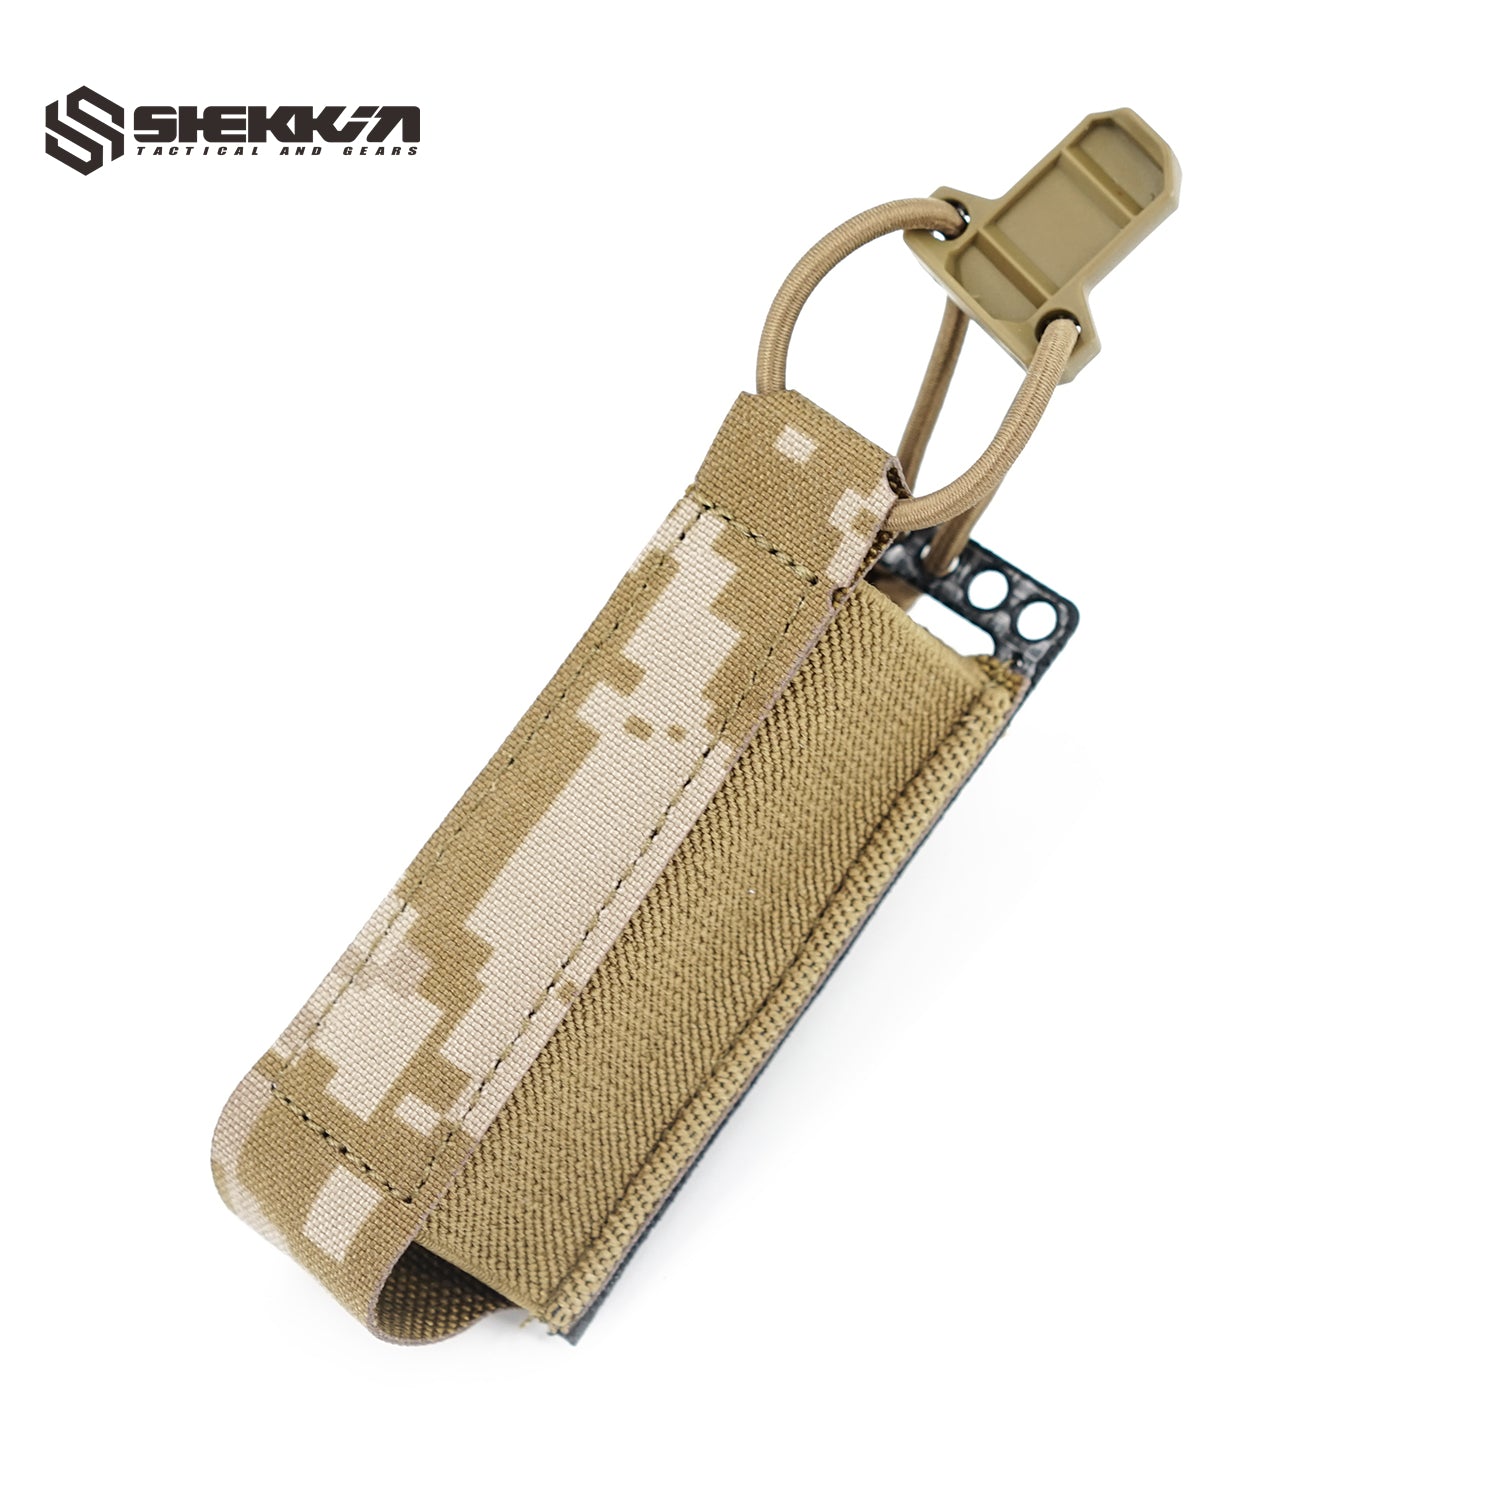 Single 9mm mag pouch with Tegris plate - Shekkin Gears